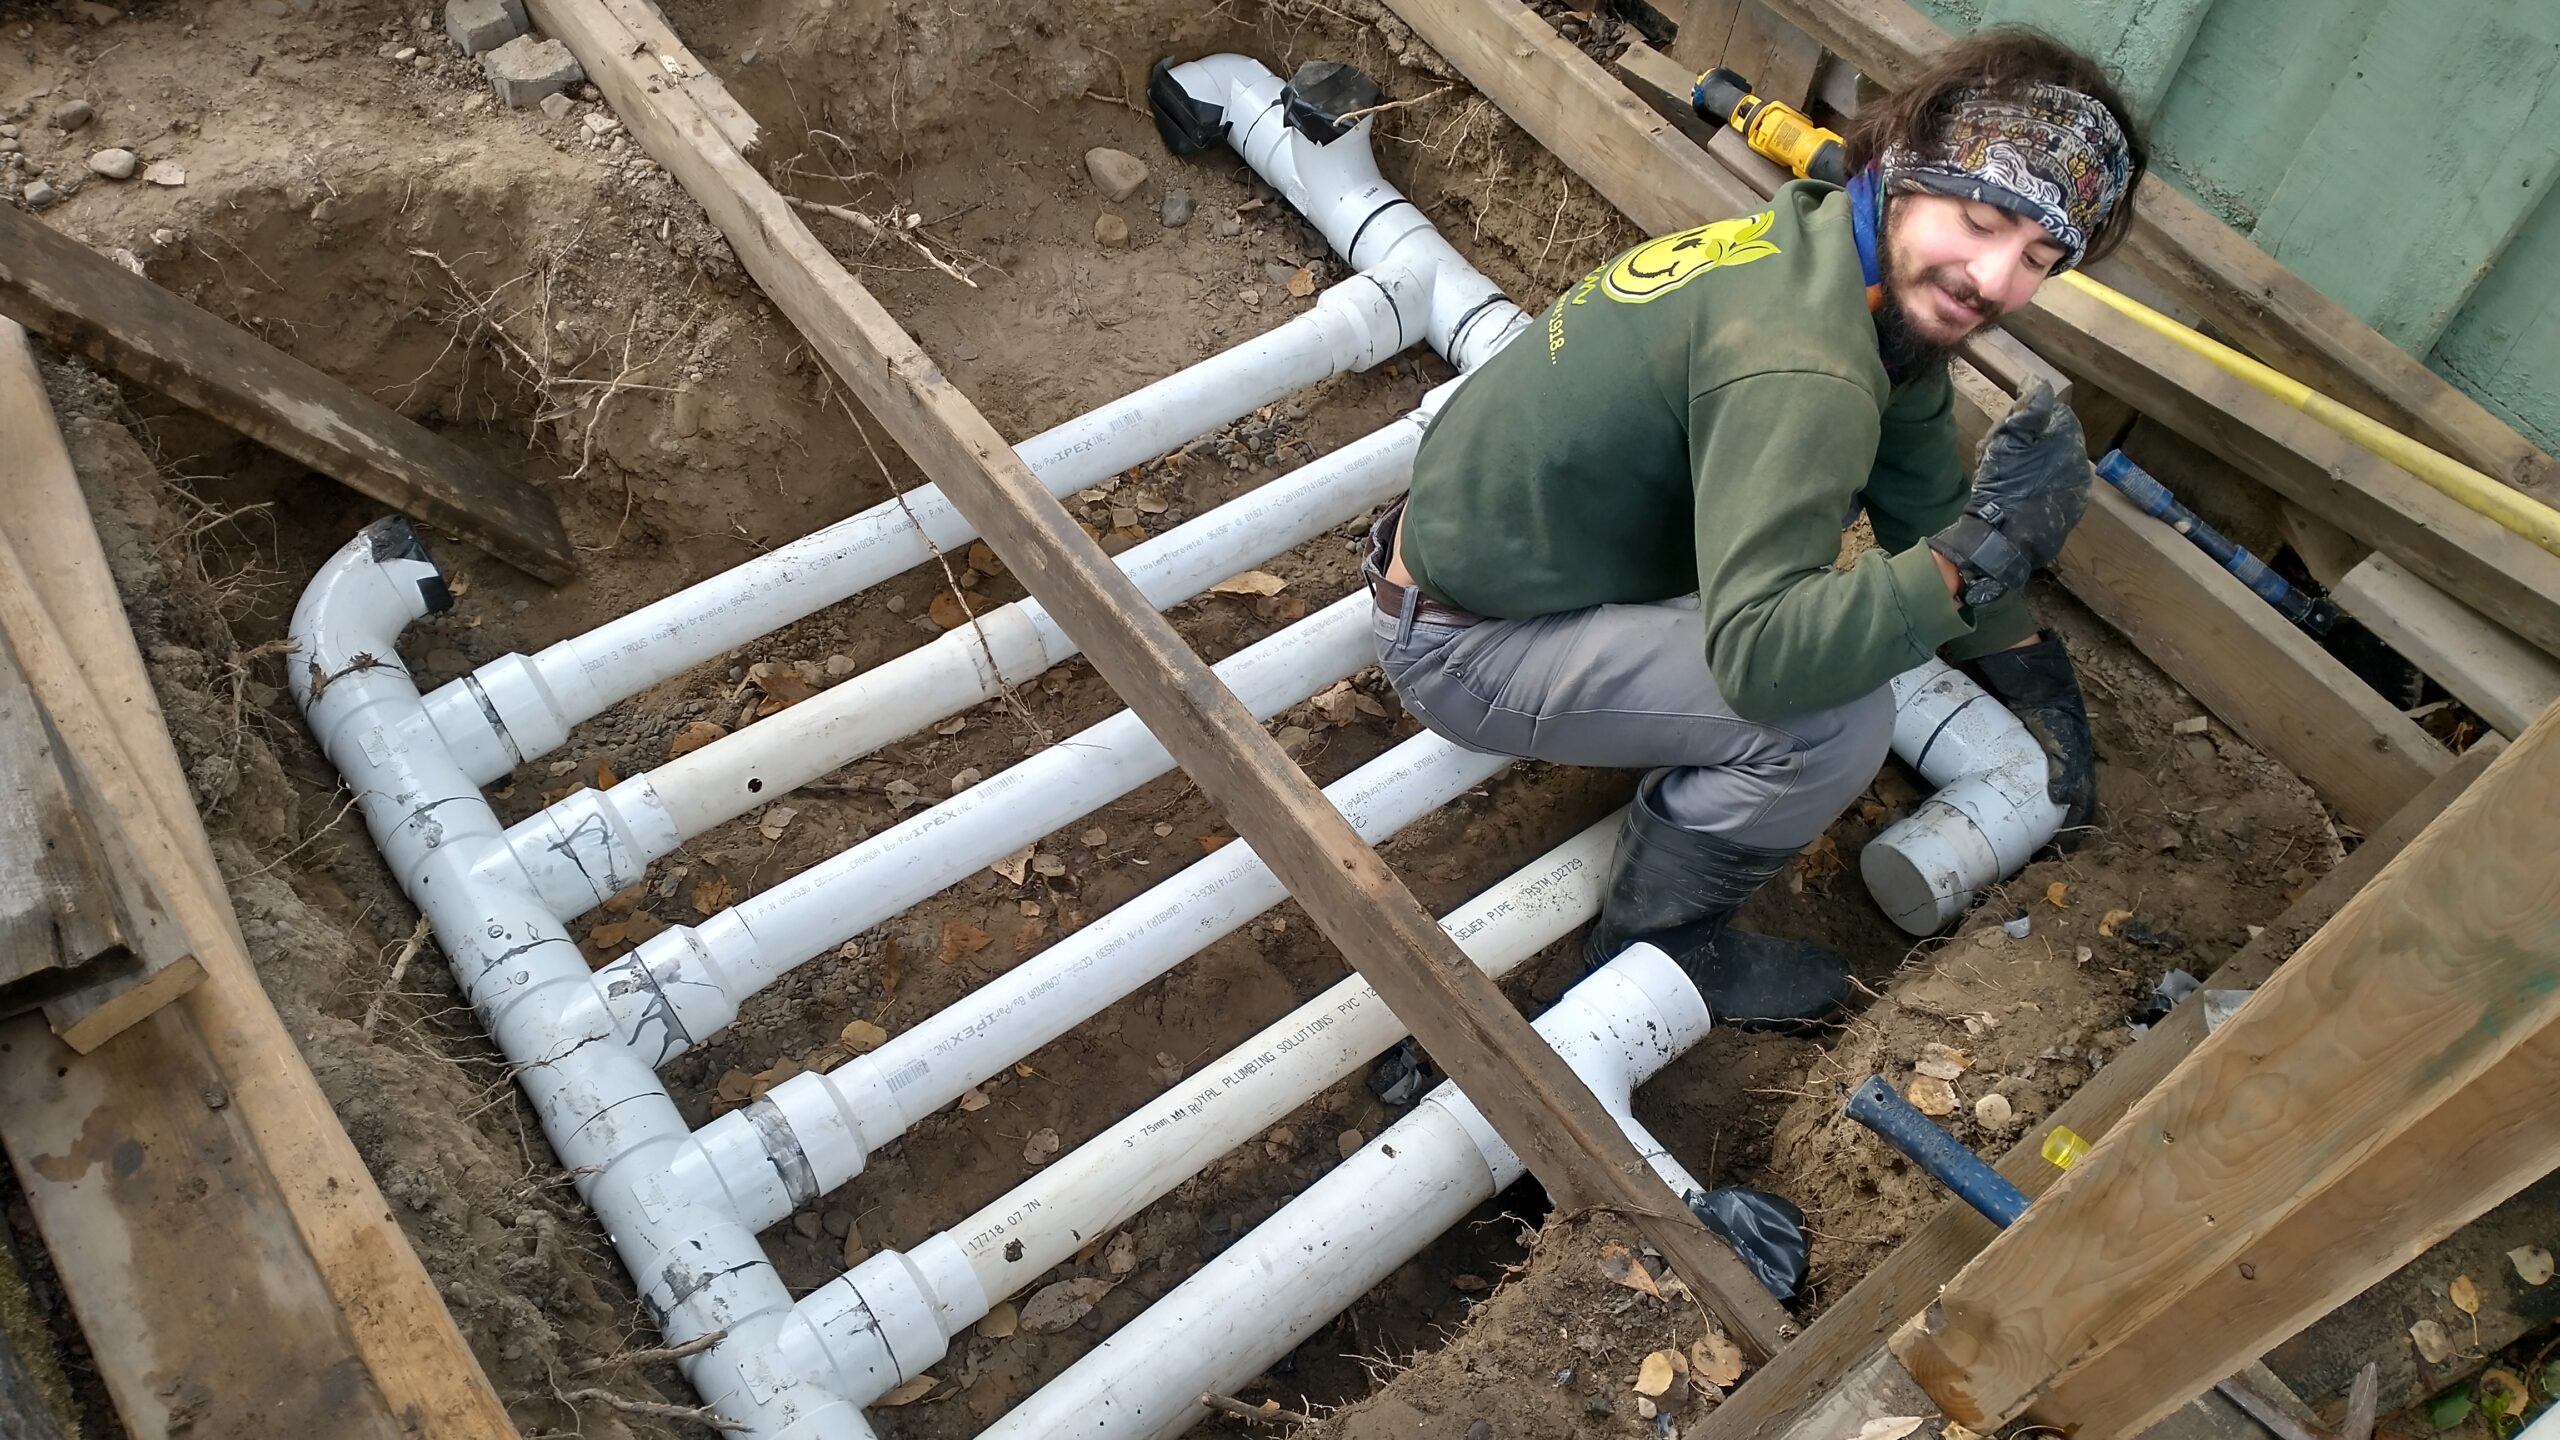 Field technician installing perforated sewer pipe  to allow solar heat to be blown and stored underground with insulation cover.